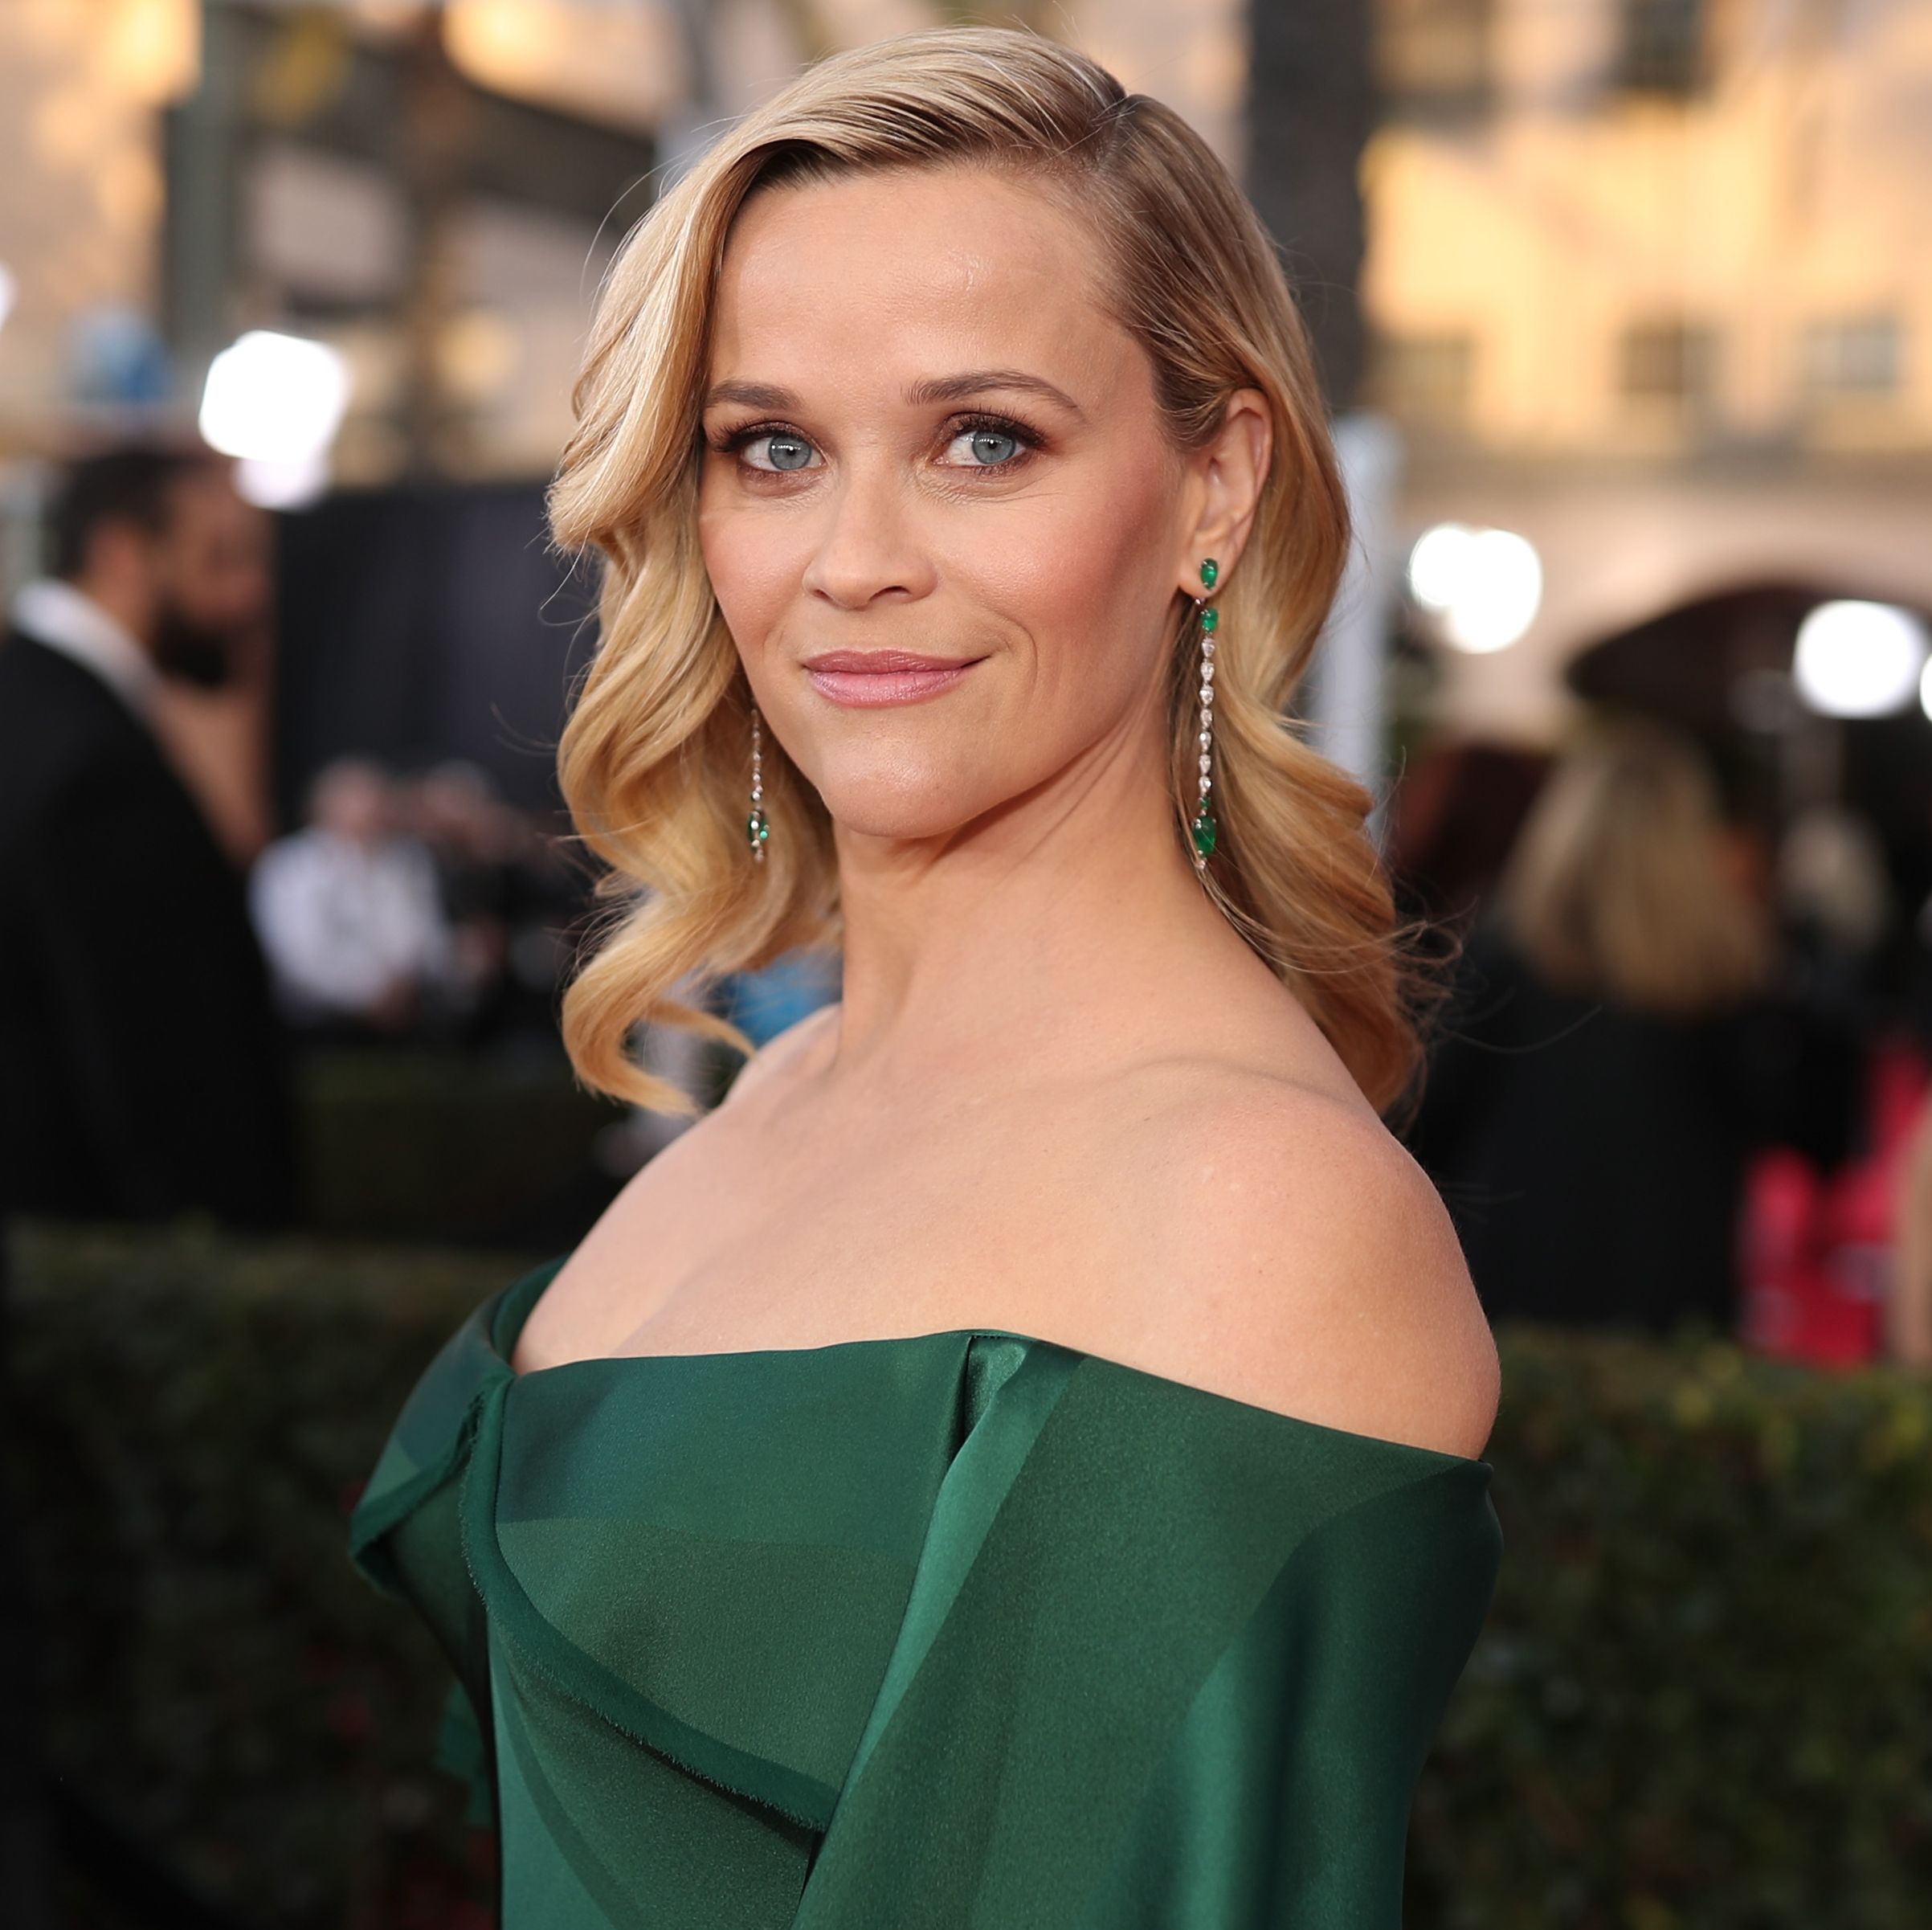 Reese Witherspoon Just Got Blonde Breakup Bangs and Showed Them Off on Instagram